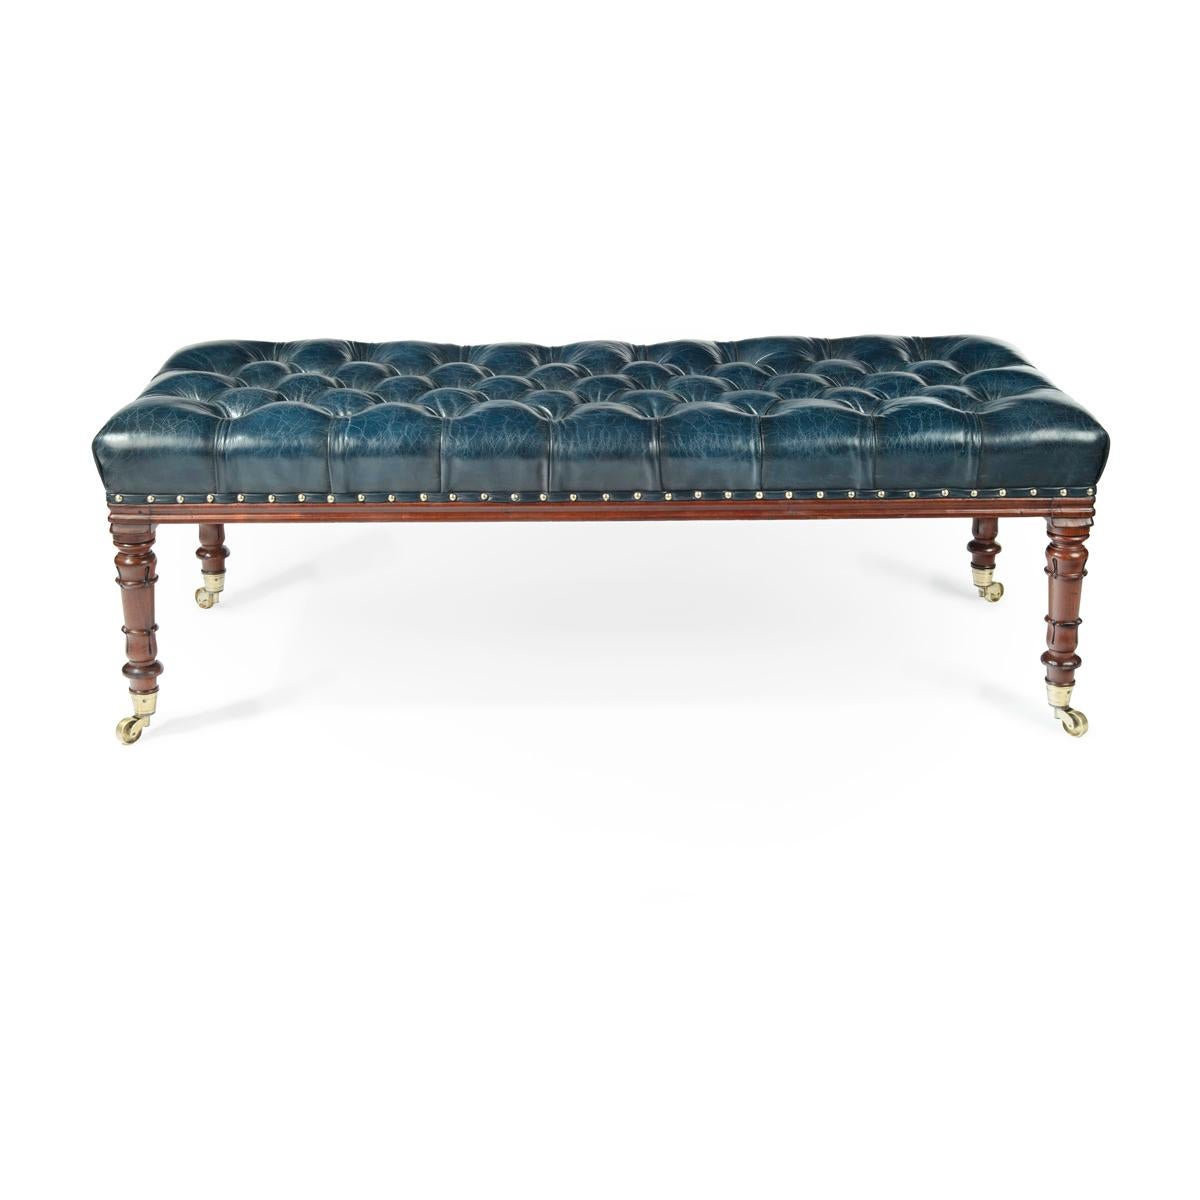 A late Regency Rosewood stool, of long rectangular form, the turned tapering legs terminating in the original brass castors, reupholstered in deep buttoned blue leather.   English, circa 1815.
